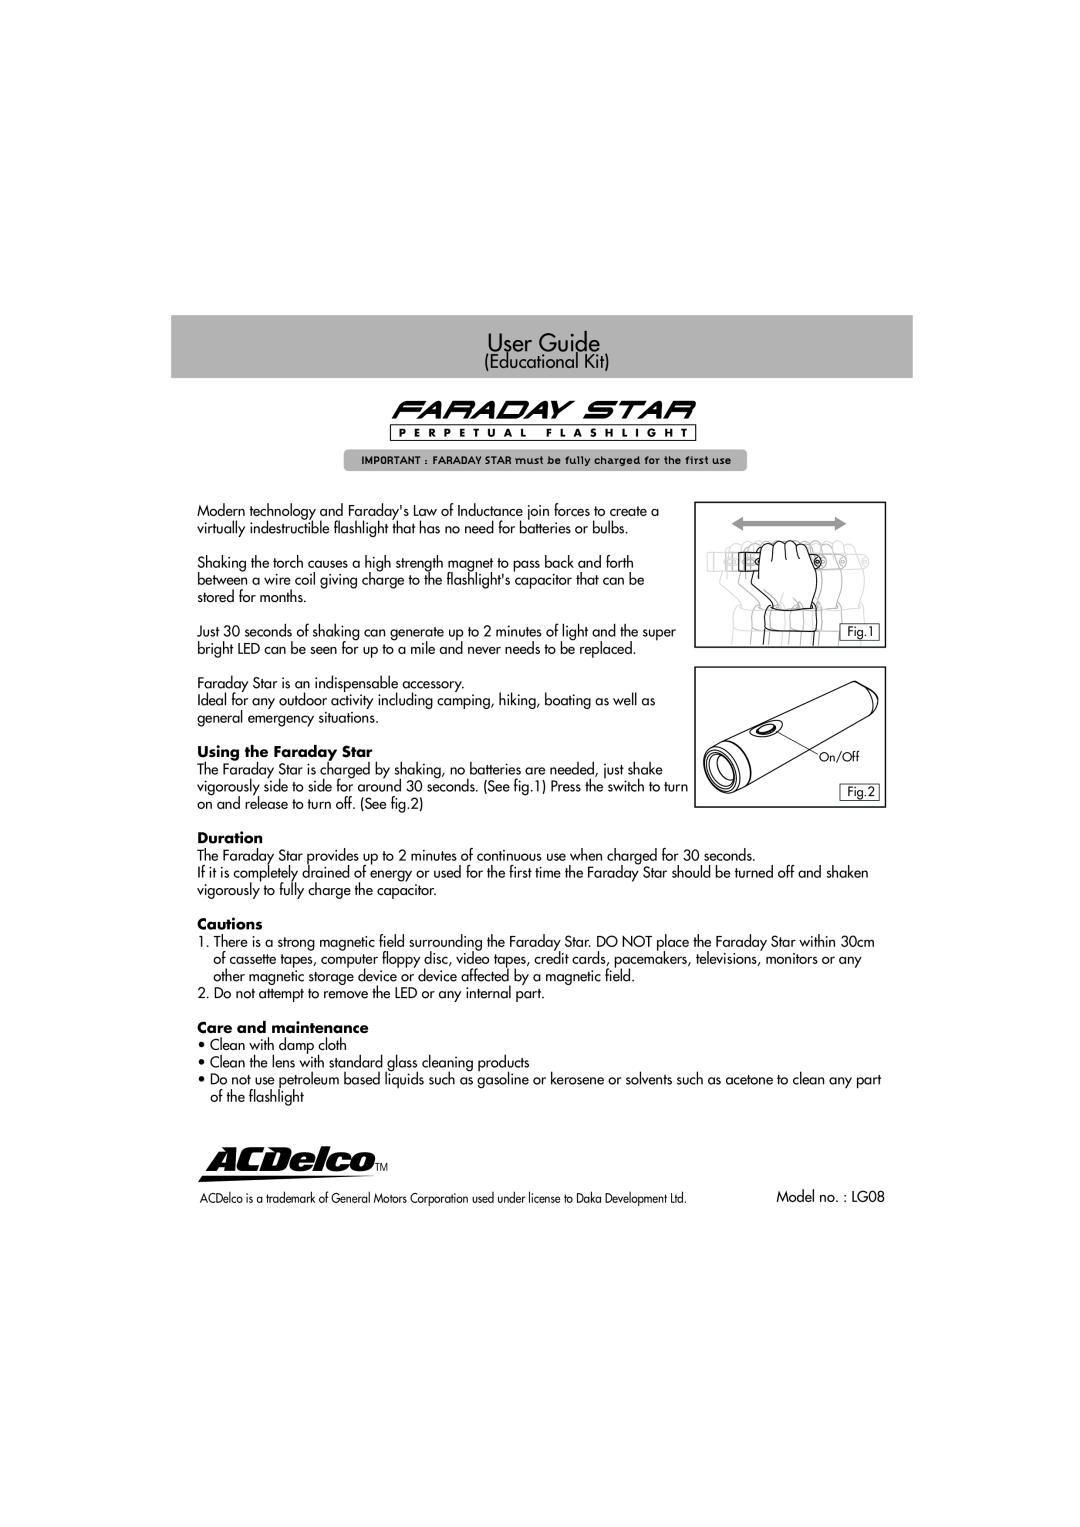 ACDelco LG08 manual Educational Kit, User Guide, Using the Faraday Star, Duration, Cautions, Care and maintenance 